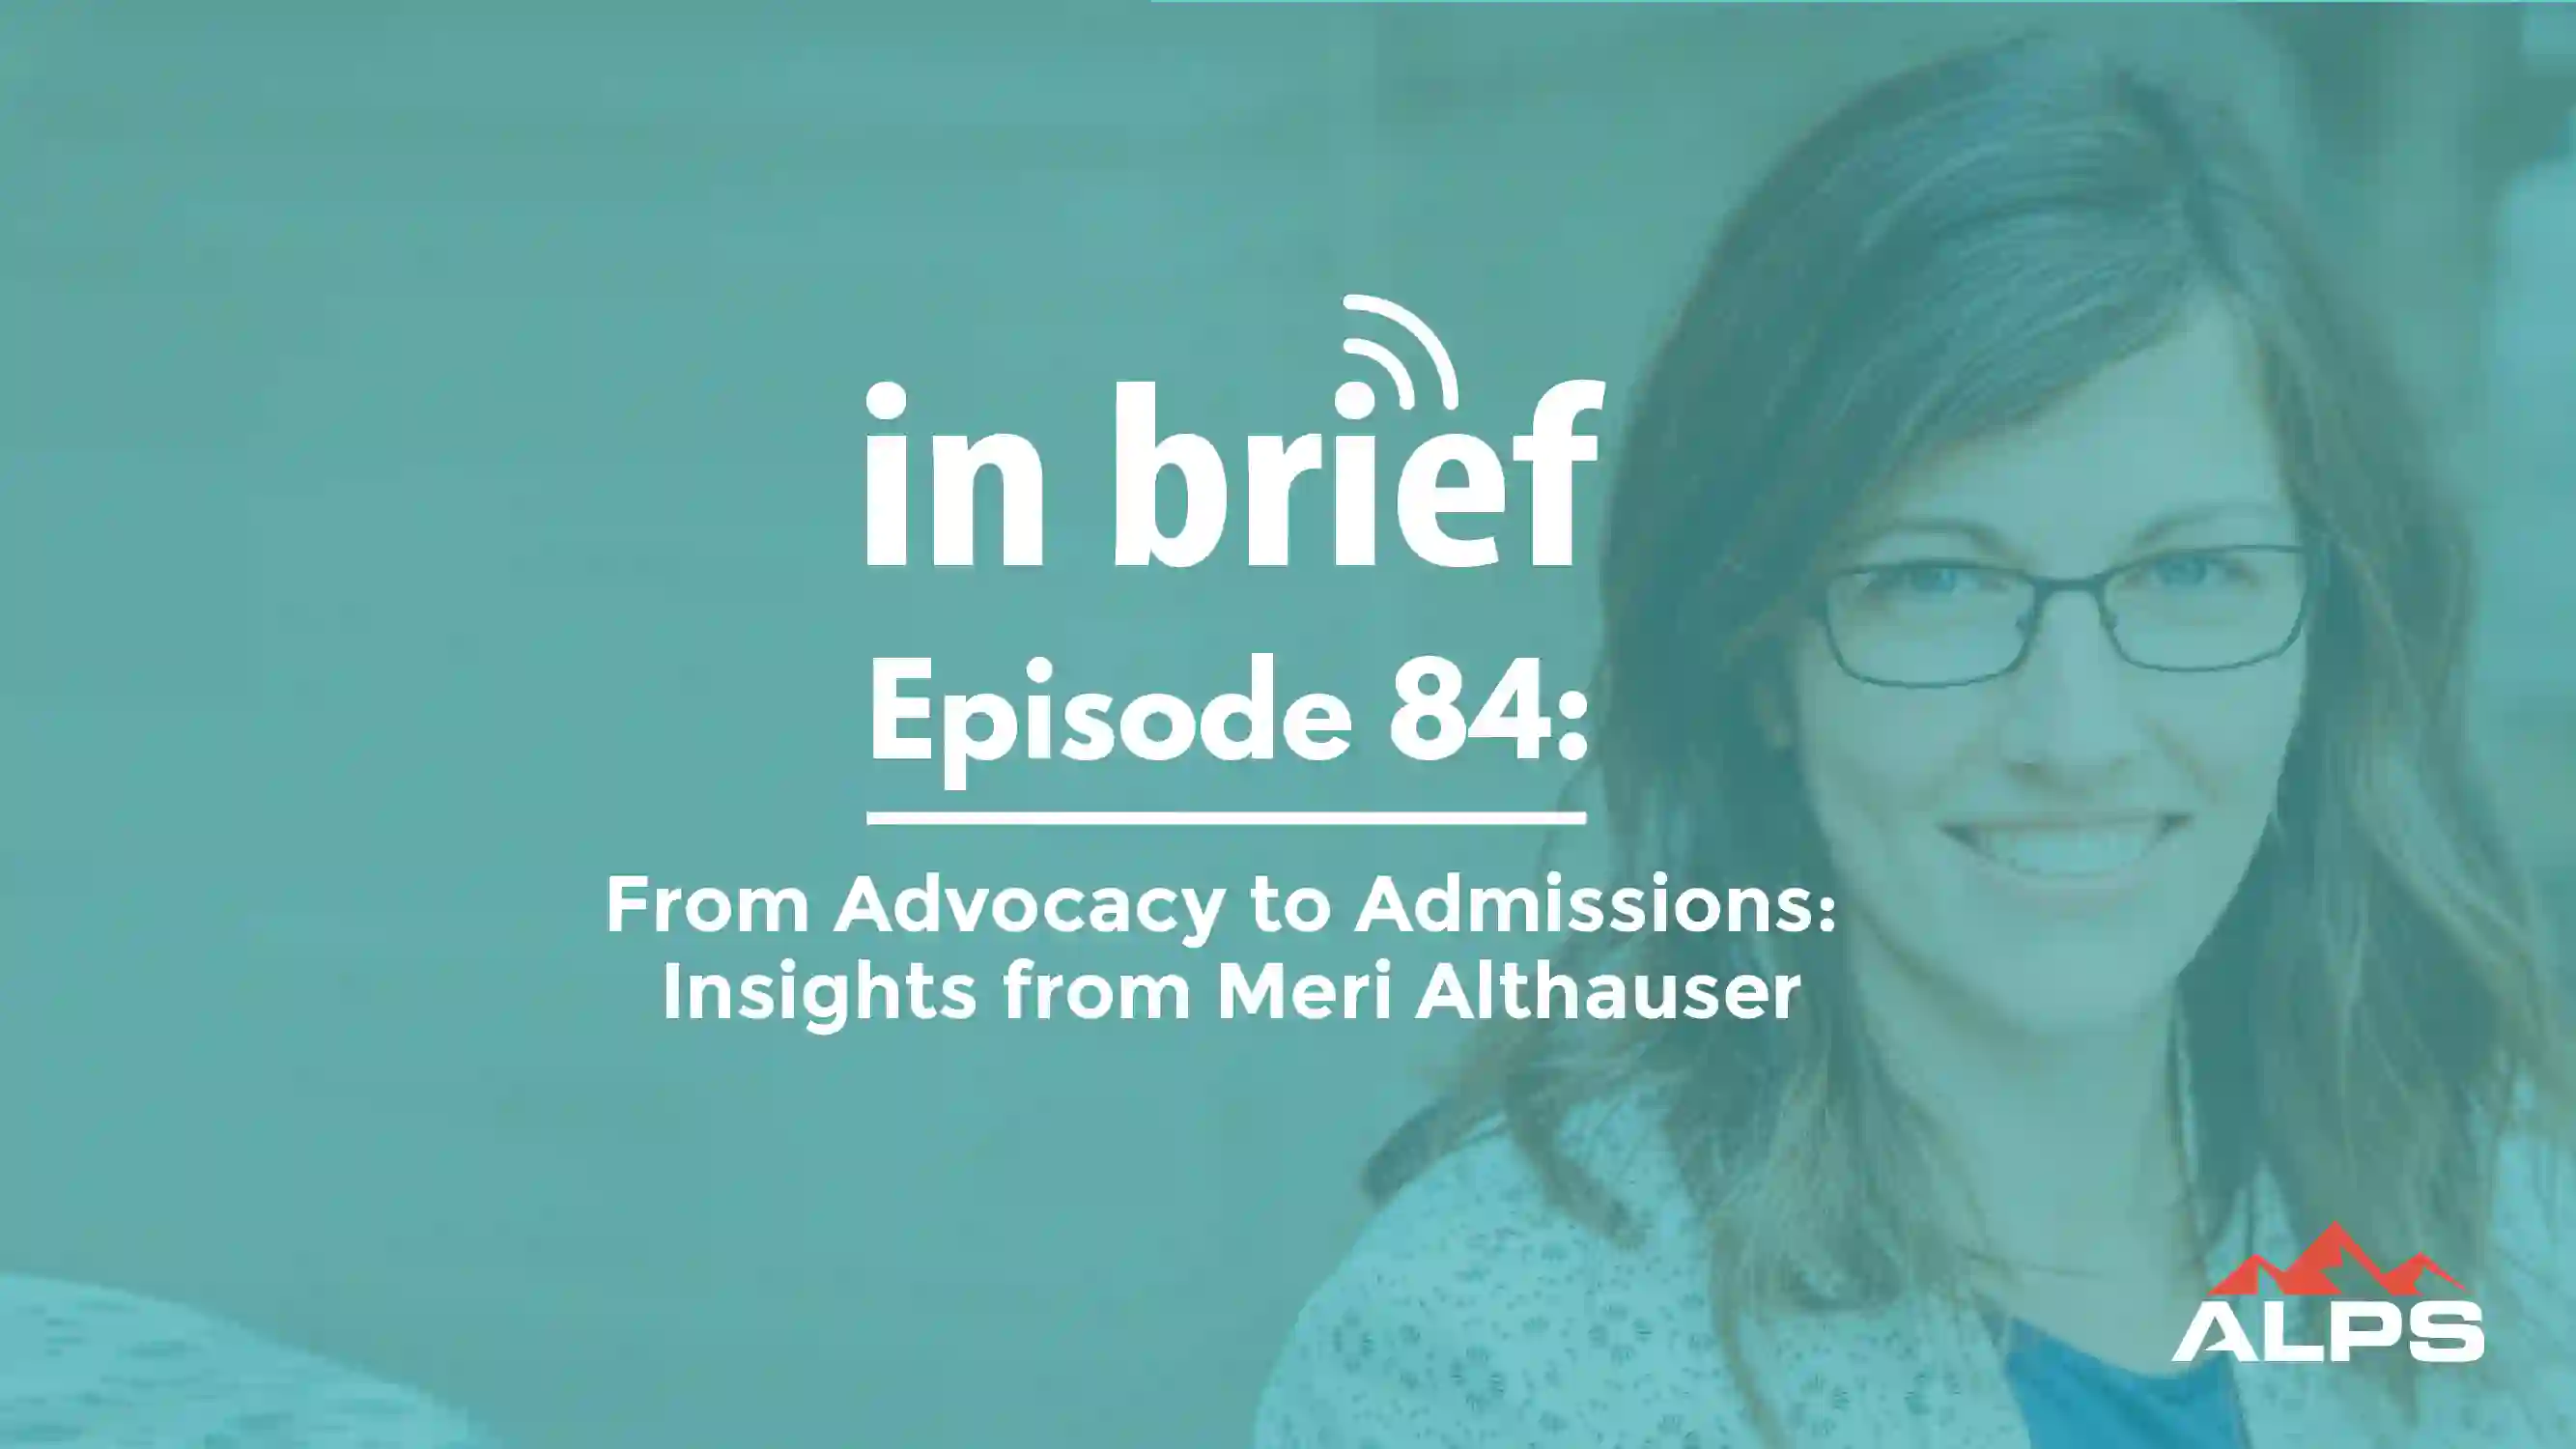 ALPS In Brief Podcast - Episode 84: From Advocacy to Admissions: Insights from Meri Althauser